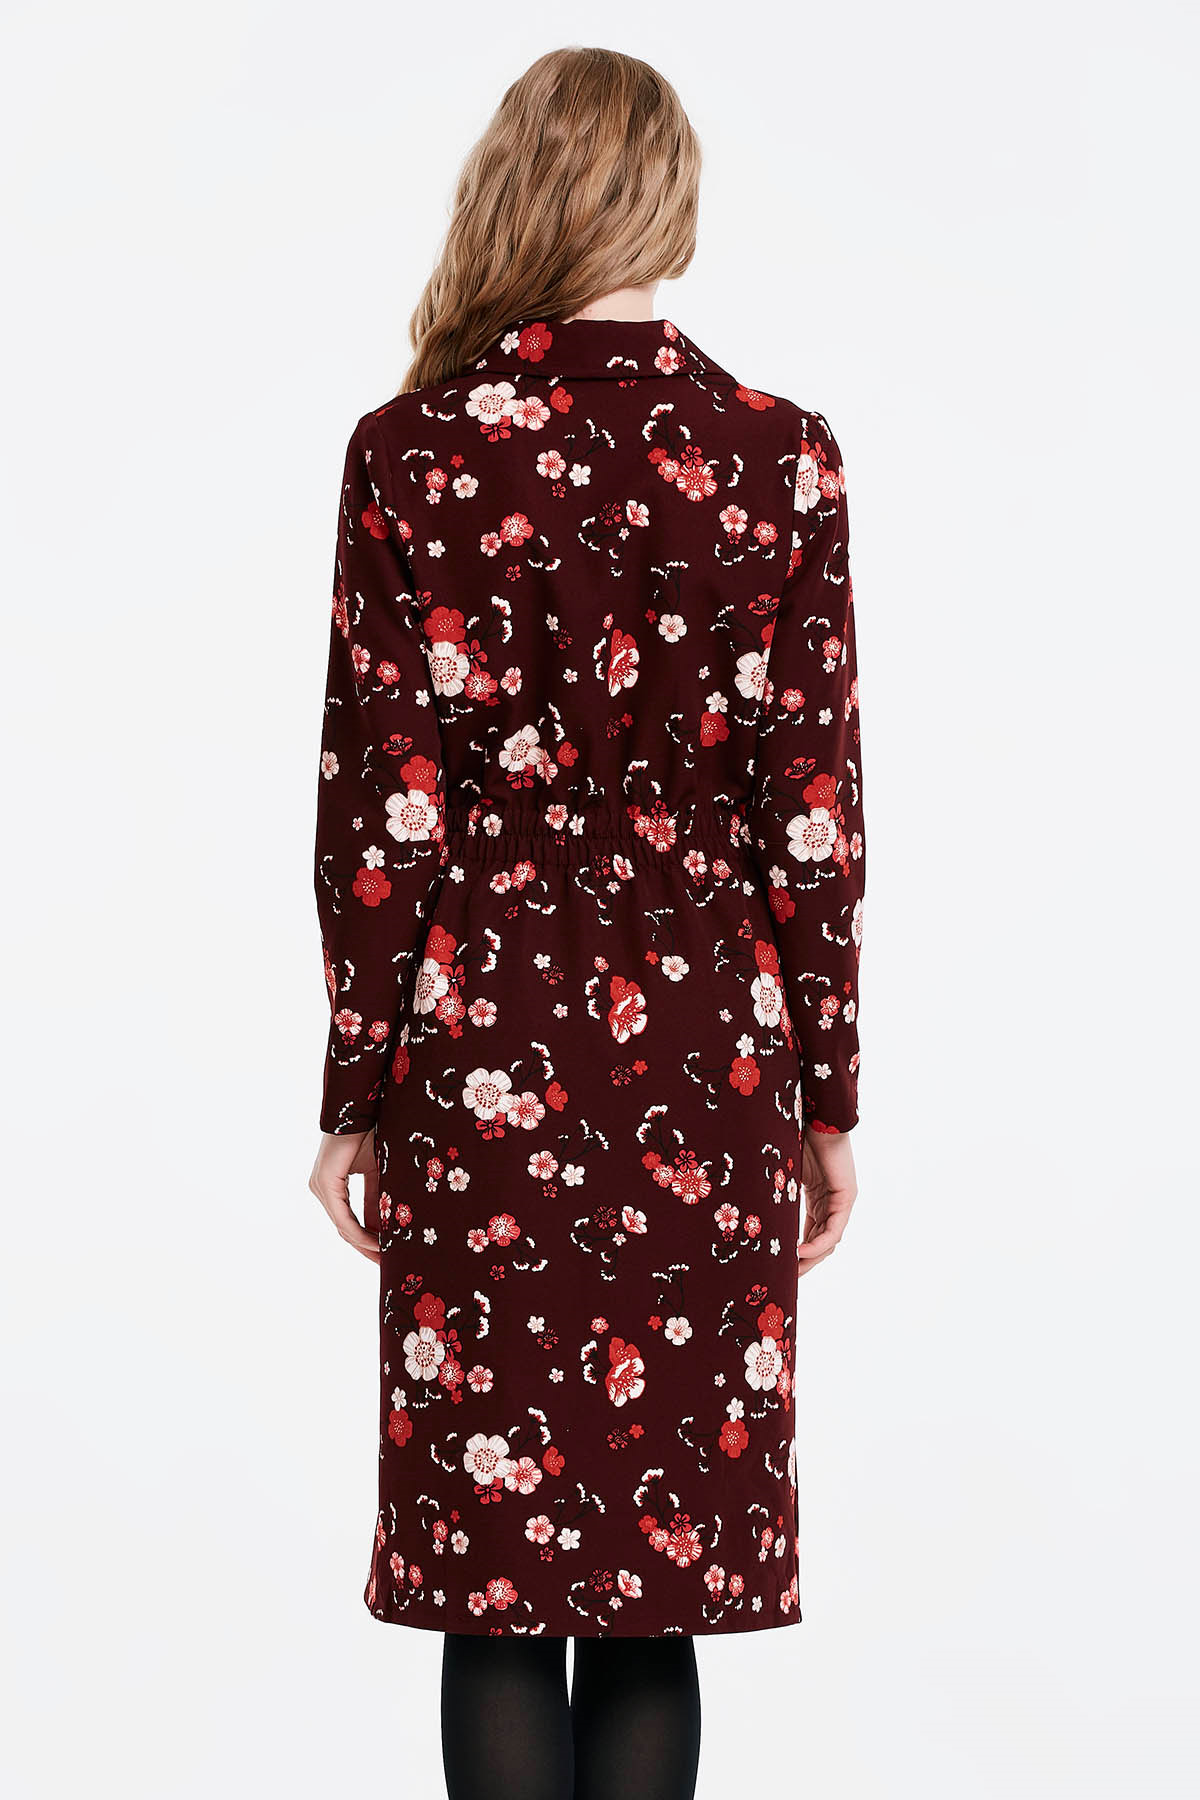 Burgundy dress with a floral print and buttons , photo 4